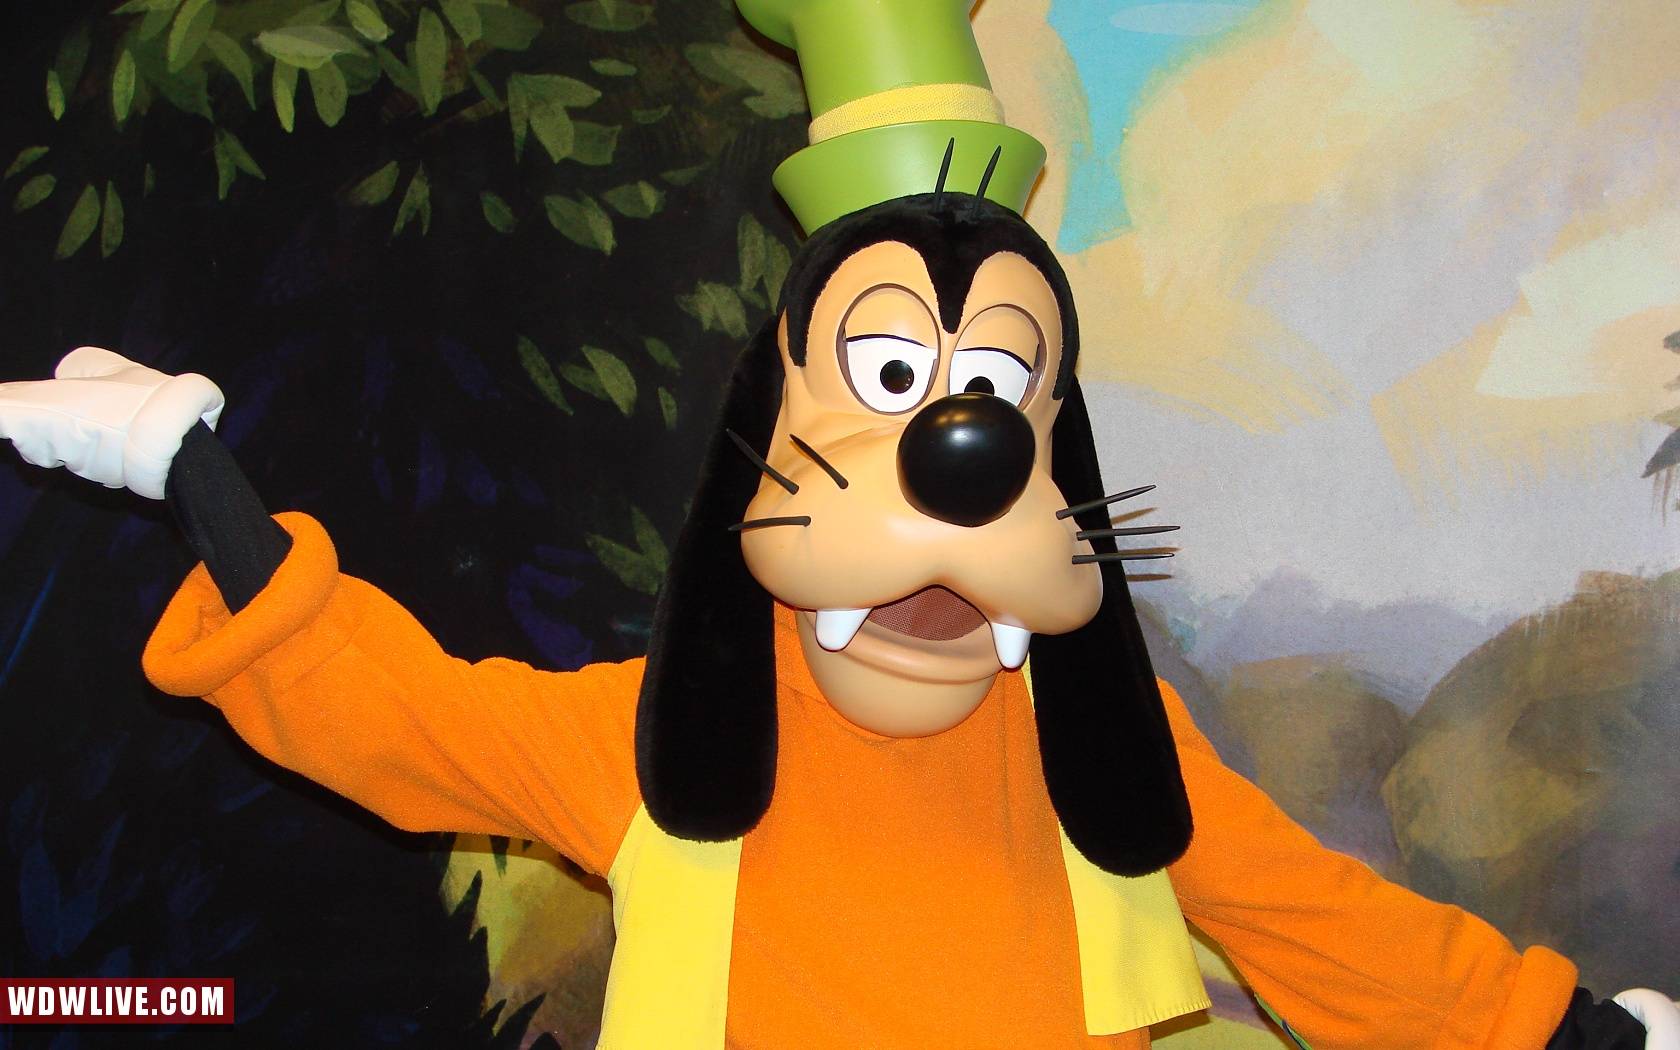 Download Goofy wallpapers for mobile phone free Goofy HD pictures